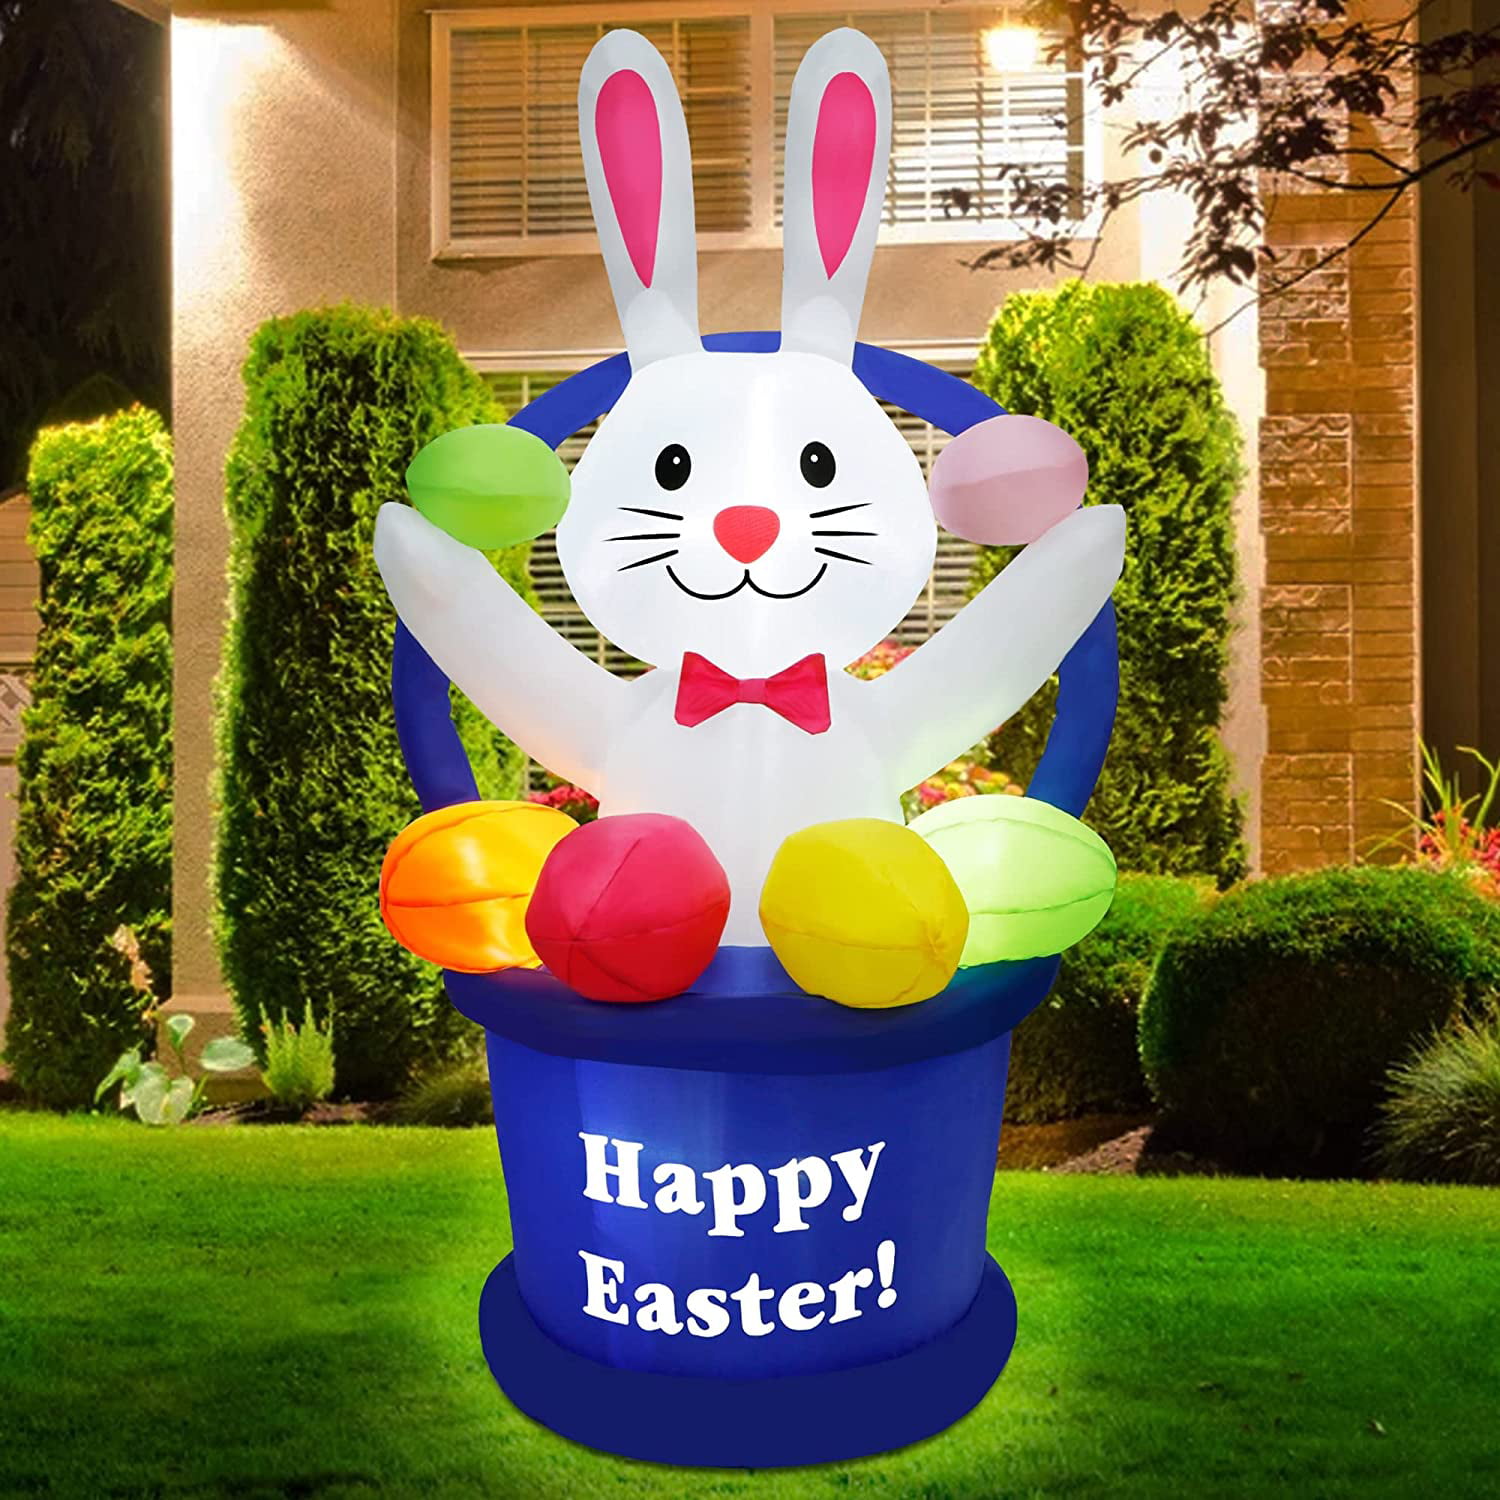 Easter Bunny Lighted Inflatable Airblown Yard Decoration Indoor/Outdoor Yard Art 